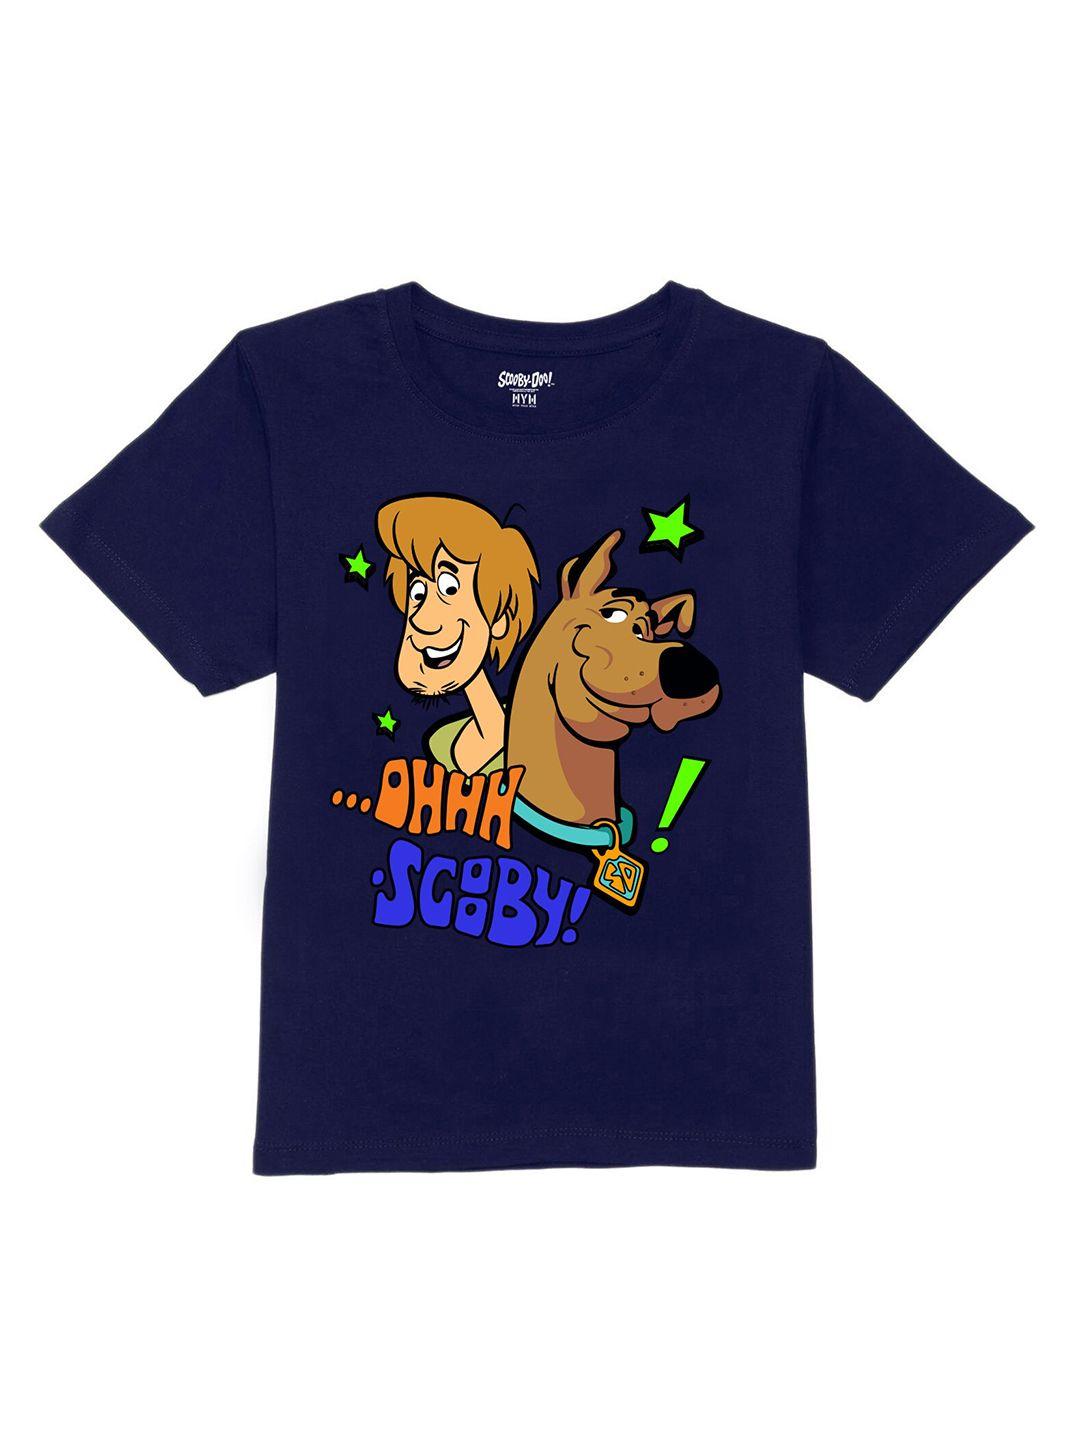 wear-your-mind-boys-scooby-doo-printed-pure-cotton-t-shirt